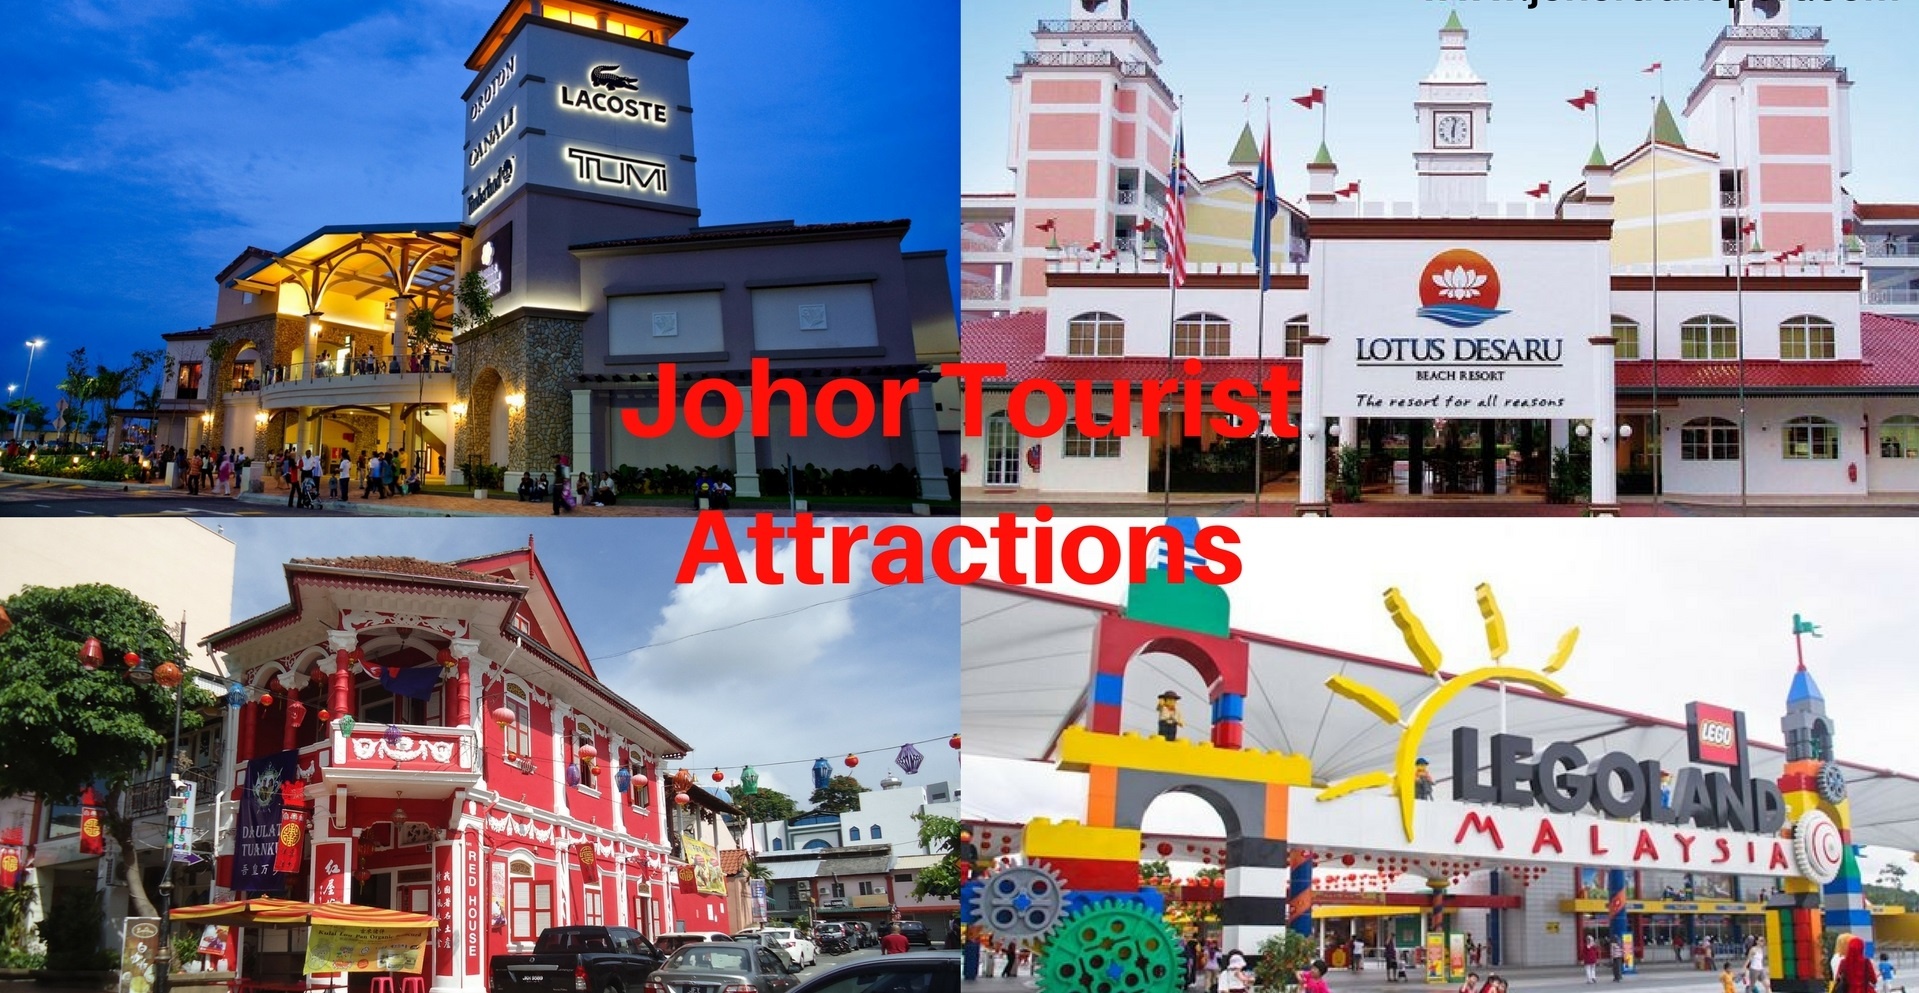 Johor Tourist Attractions Hotel 81 Palace